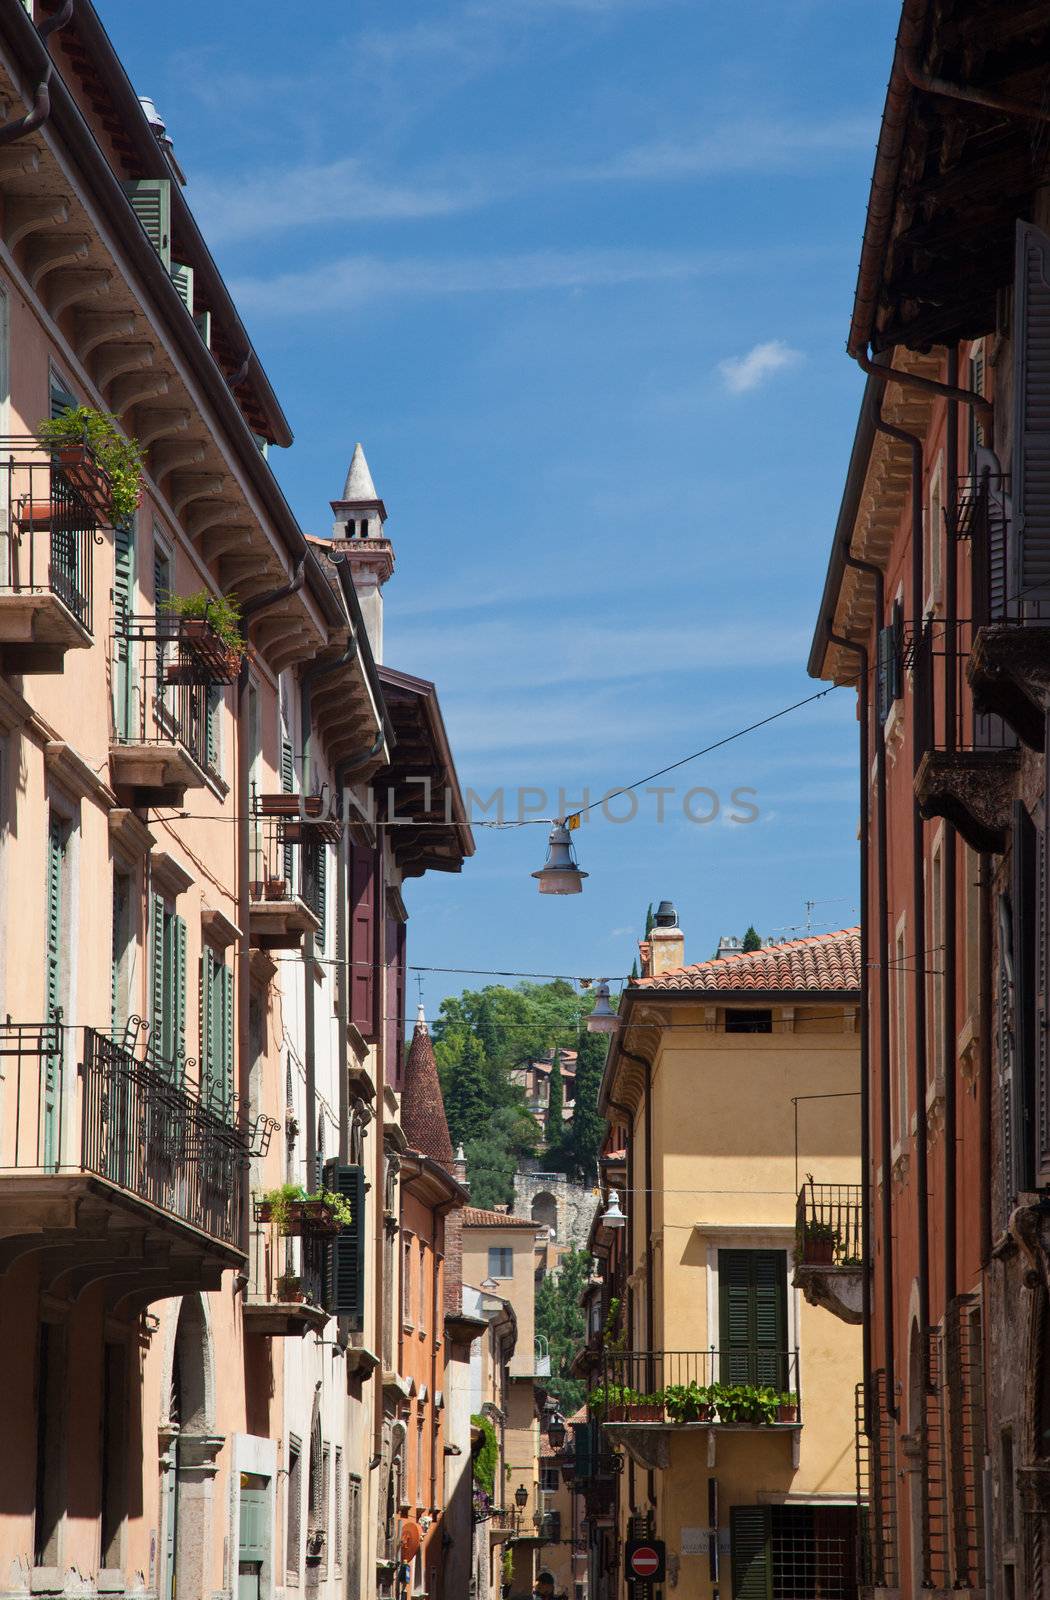 Old streets in Verona by steheap